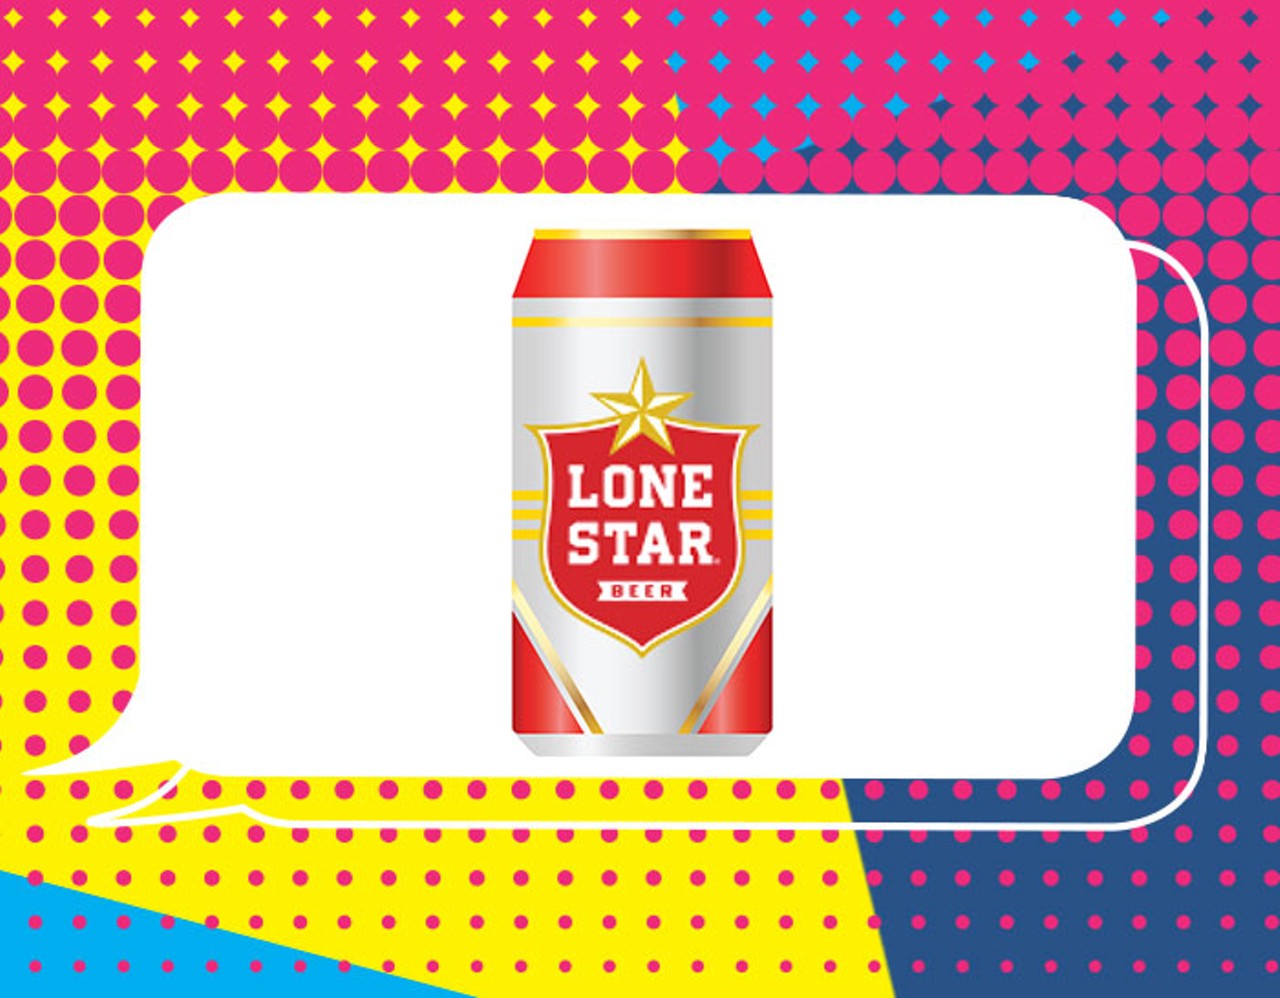 Lone Star Can
When to use it: A staple of happy hours all over town, the 16-ounce can of cheap beer is ubiquitous in the Alamo City. From backyard barbecues to watching the Spurs (hopefully) steamroll their way through the season, this emoji will come in handy for all those parties, concerts and sporting events that San Antonians hold dear.